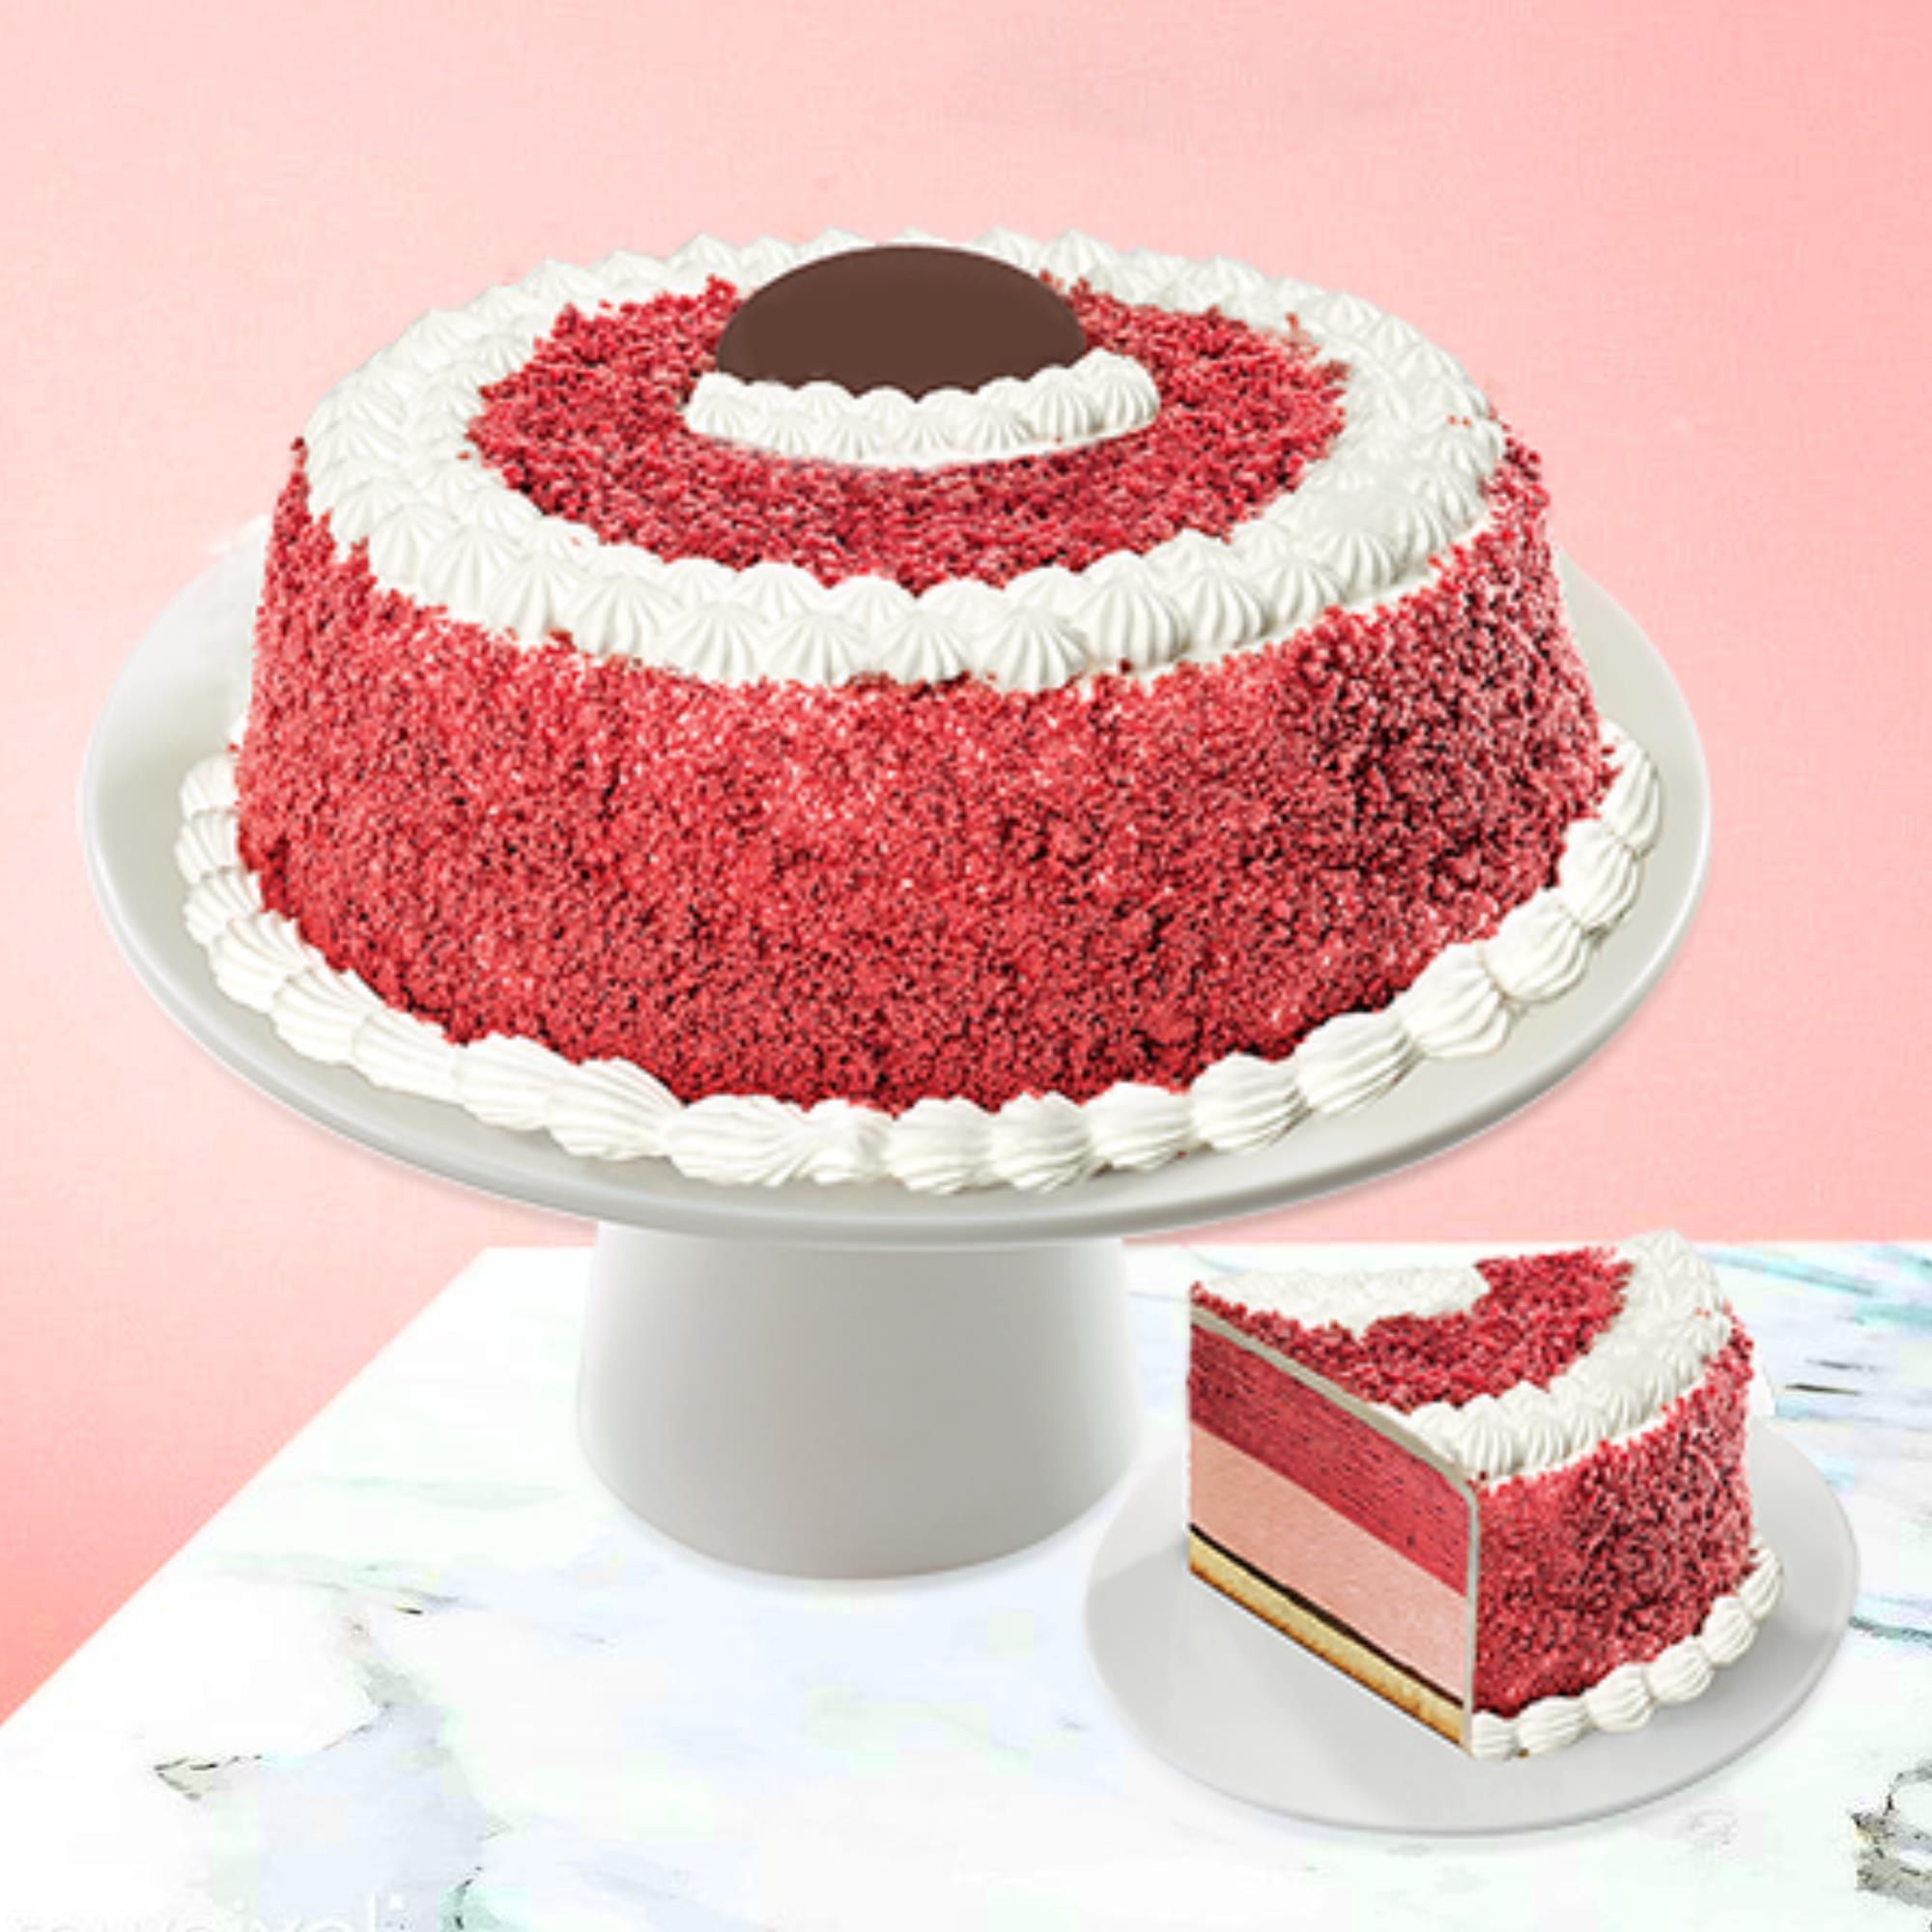 Buy Cake Waves Fresh Cake Berry Blast Eggless 1 Kg Online at the Best Price  of Rs null - bigbasket